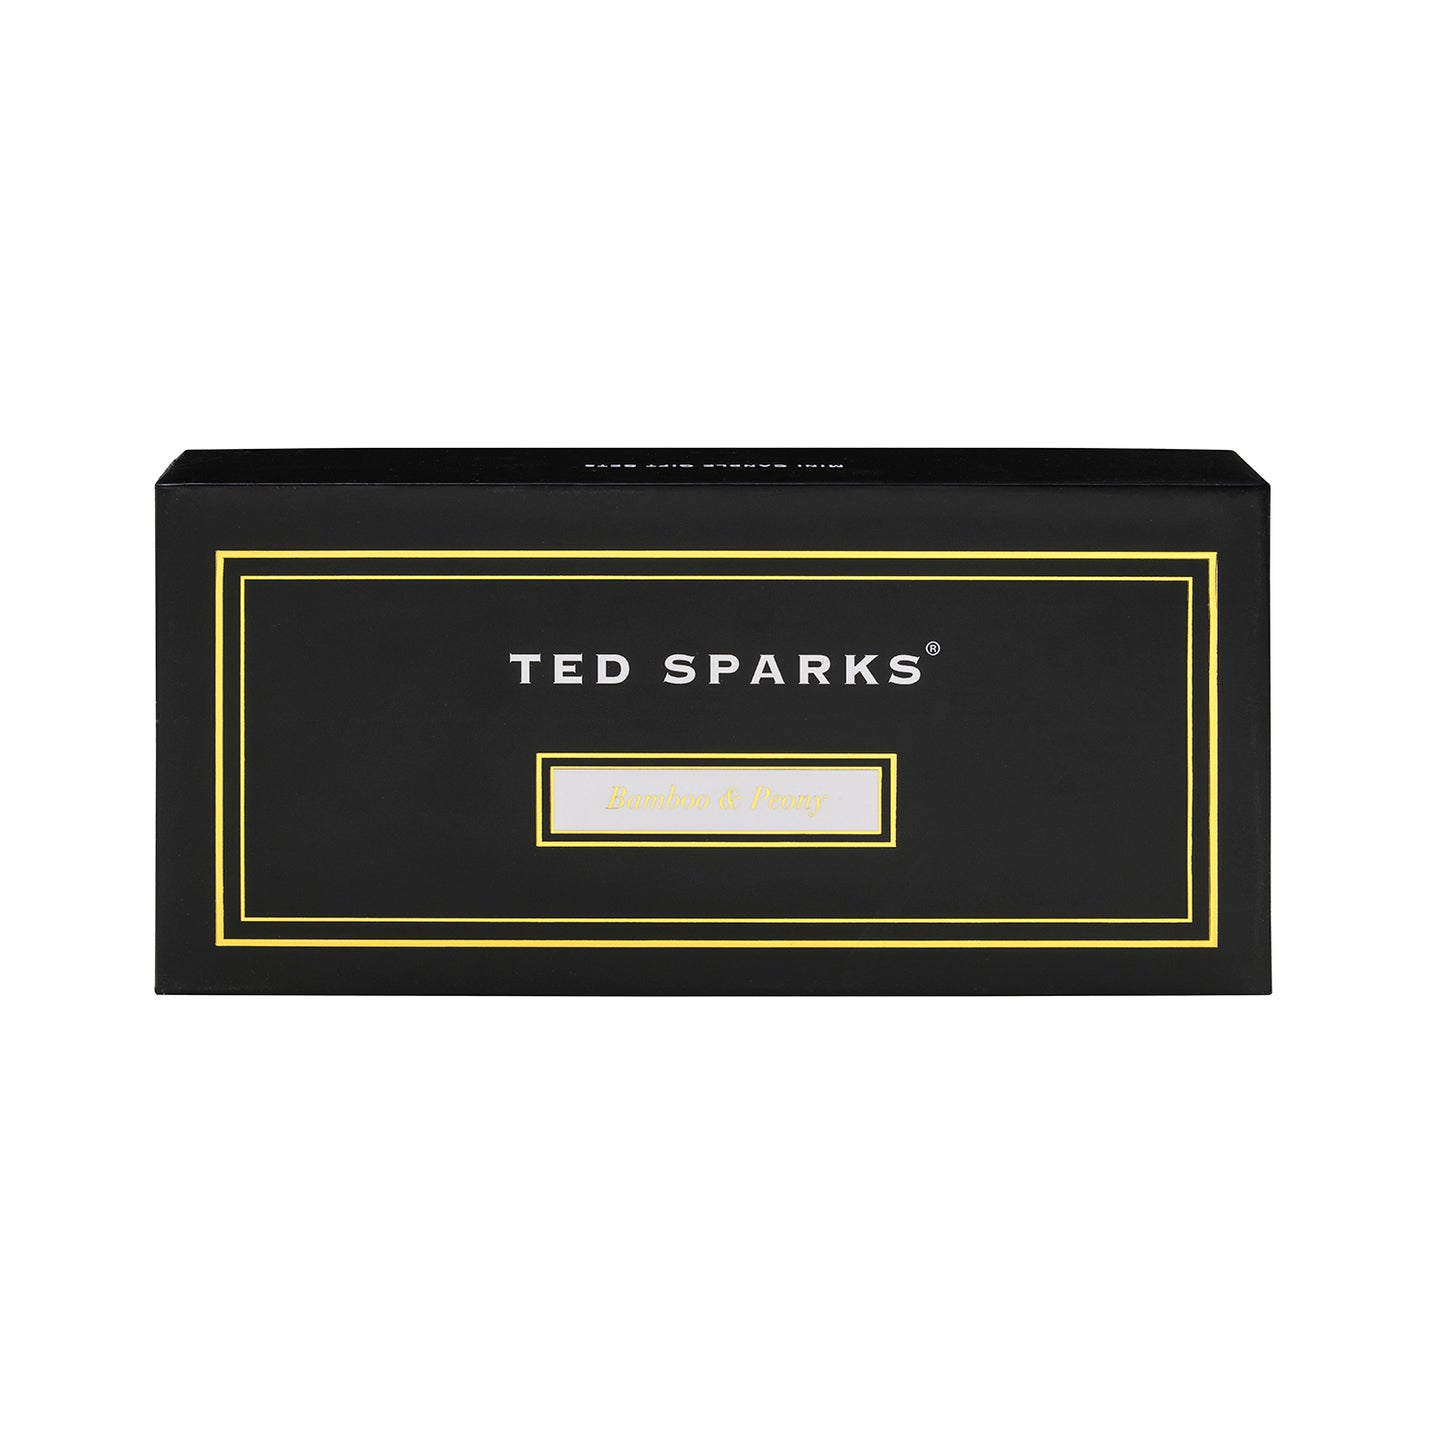 TED SPARKS Mini Candle Gift Set Bamboo &amp; Peony